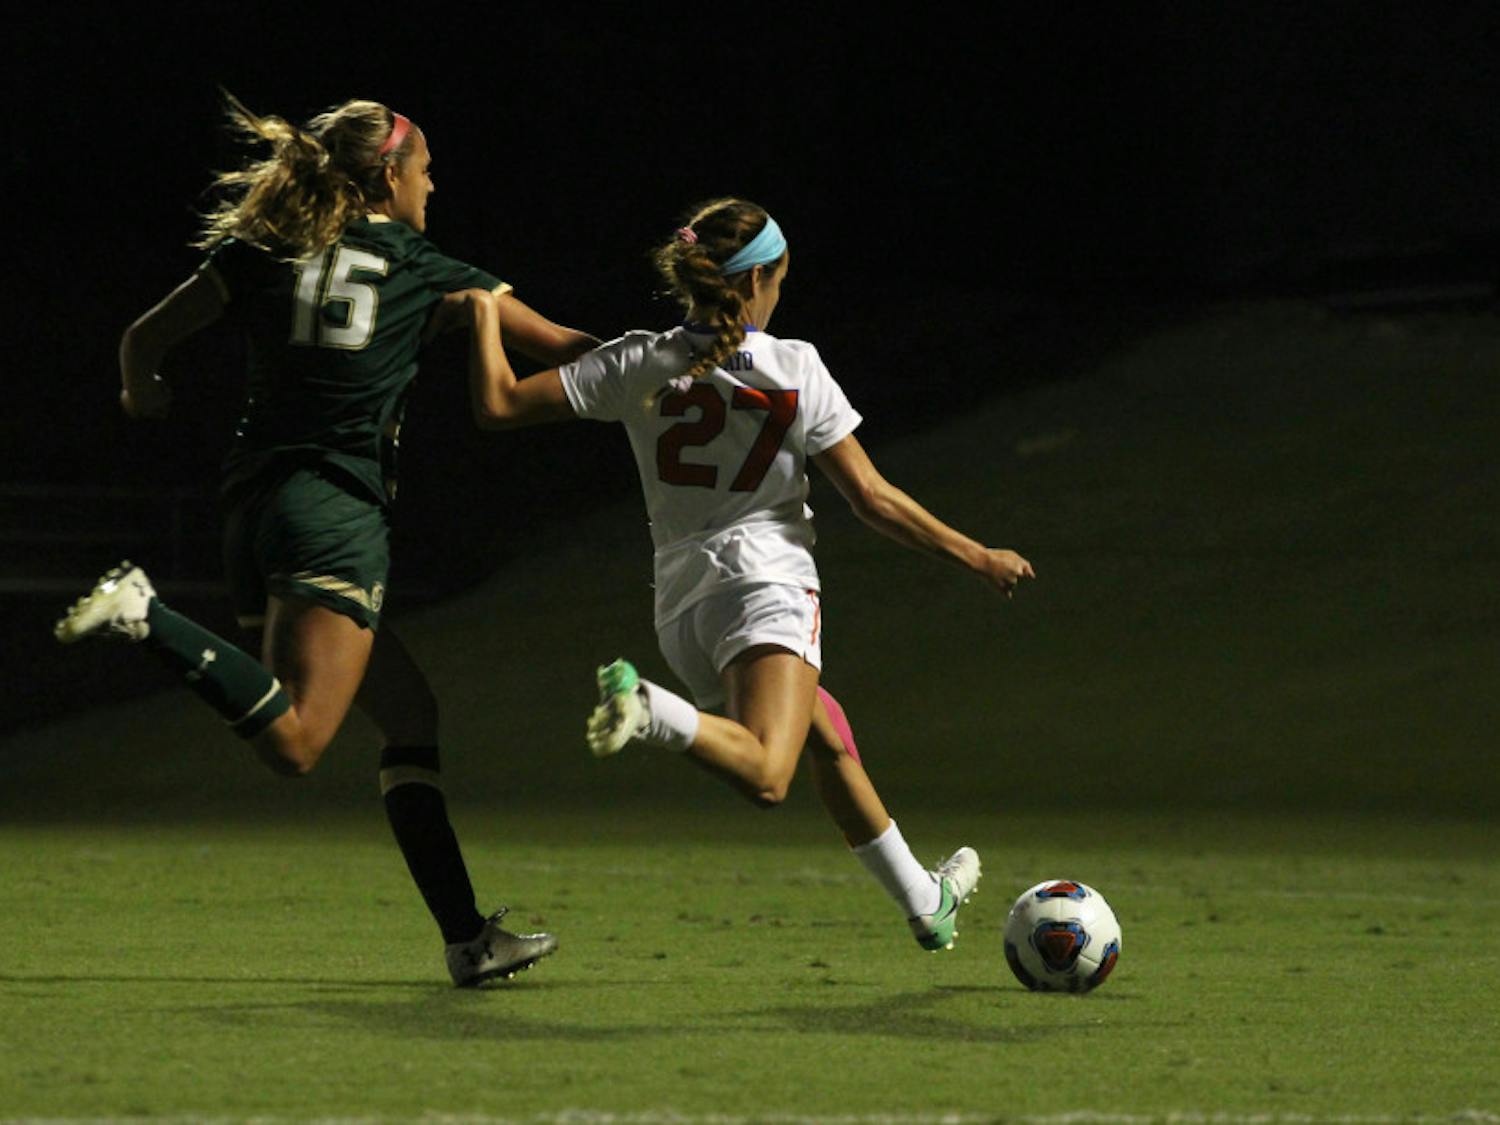 UF midfielder Mayra Pelayo scored the only goal of the game as Florida defeats USF, 1-0, Thursday night.